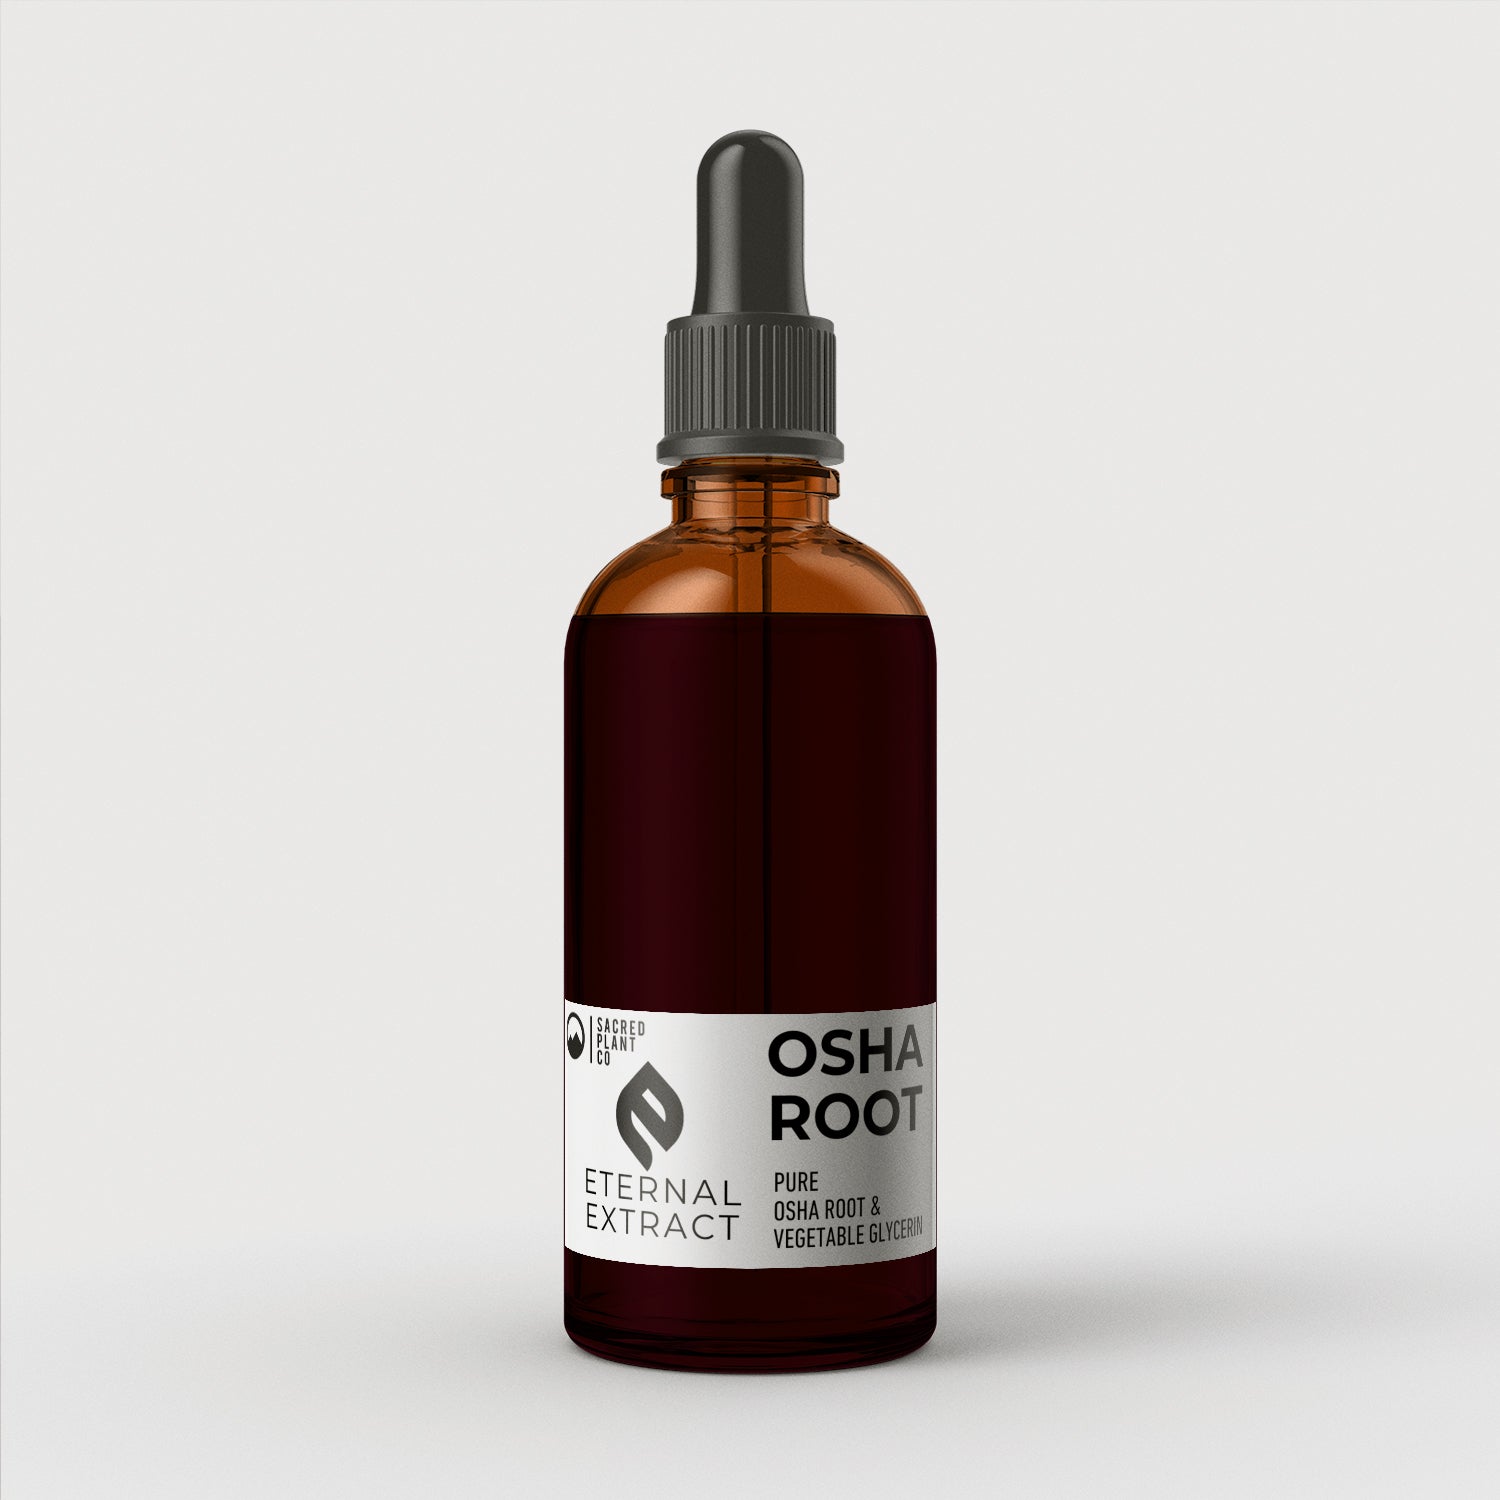 Large amber bottle of Sacred Plant Co Osha Root Tincture Eternal Extract with dropper, natural respiratory aid.